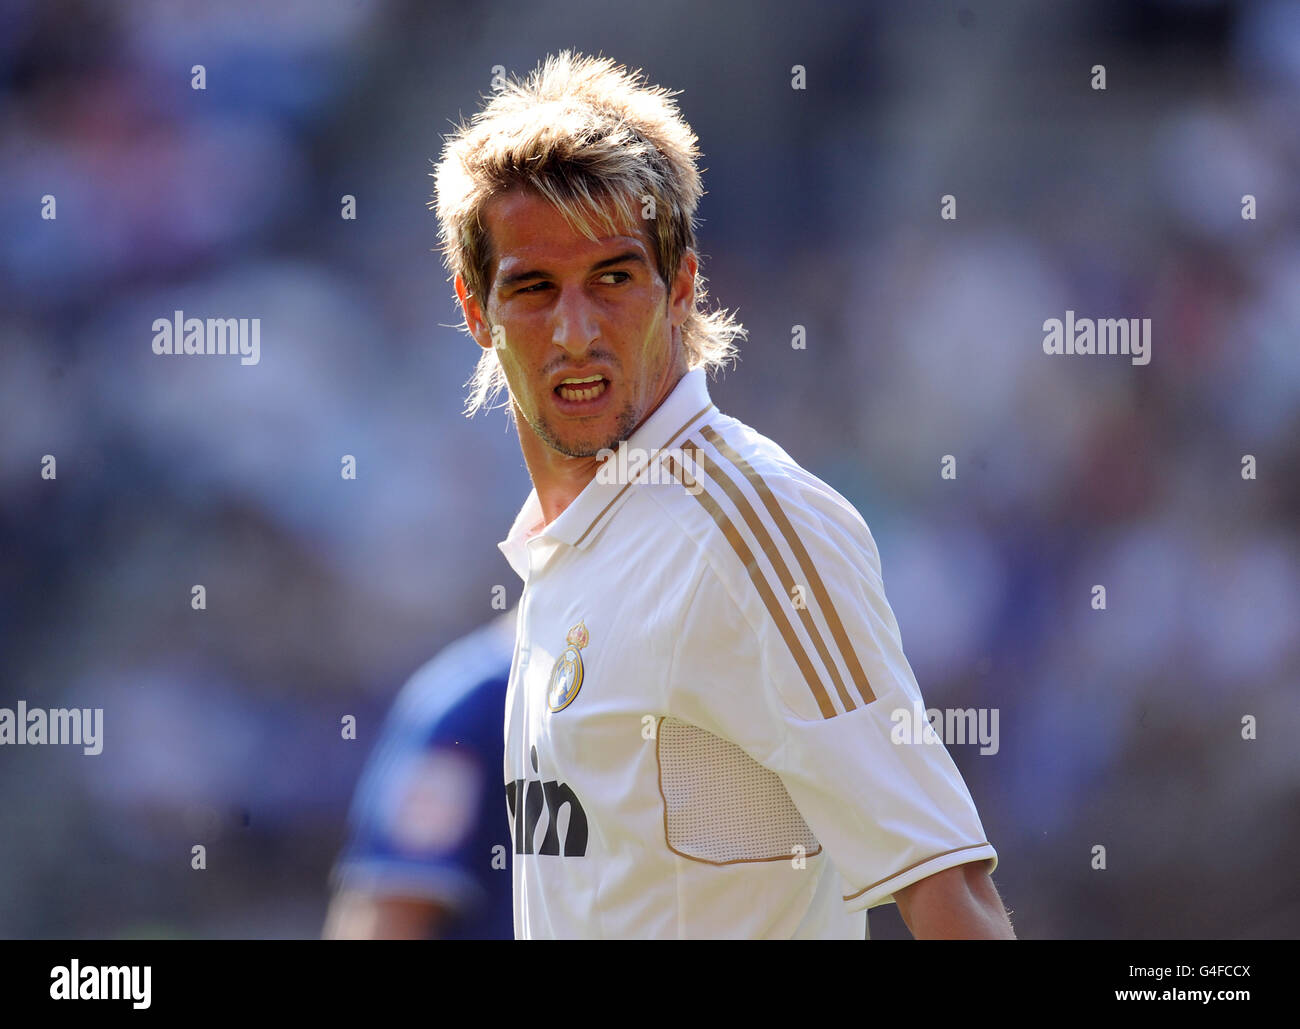 Soccer - npower Challenge Cup 2011 - Leicester City v Real Madrid - King Power Stadium. Fabio Coentrao, Real Madrid Stock Photo